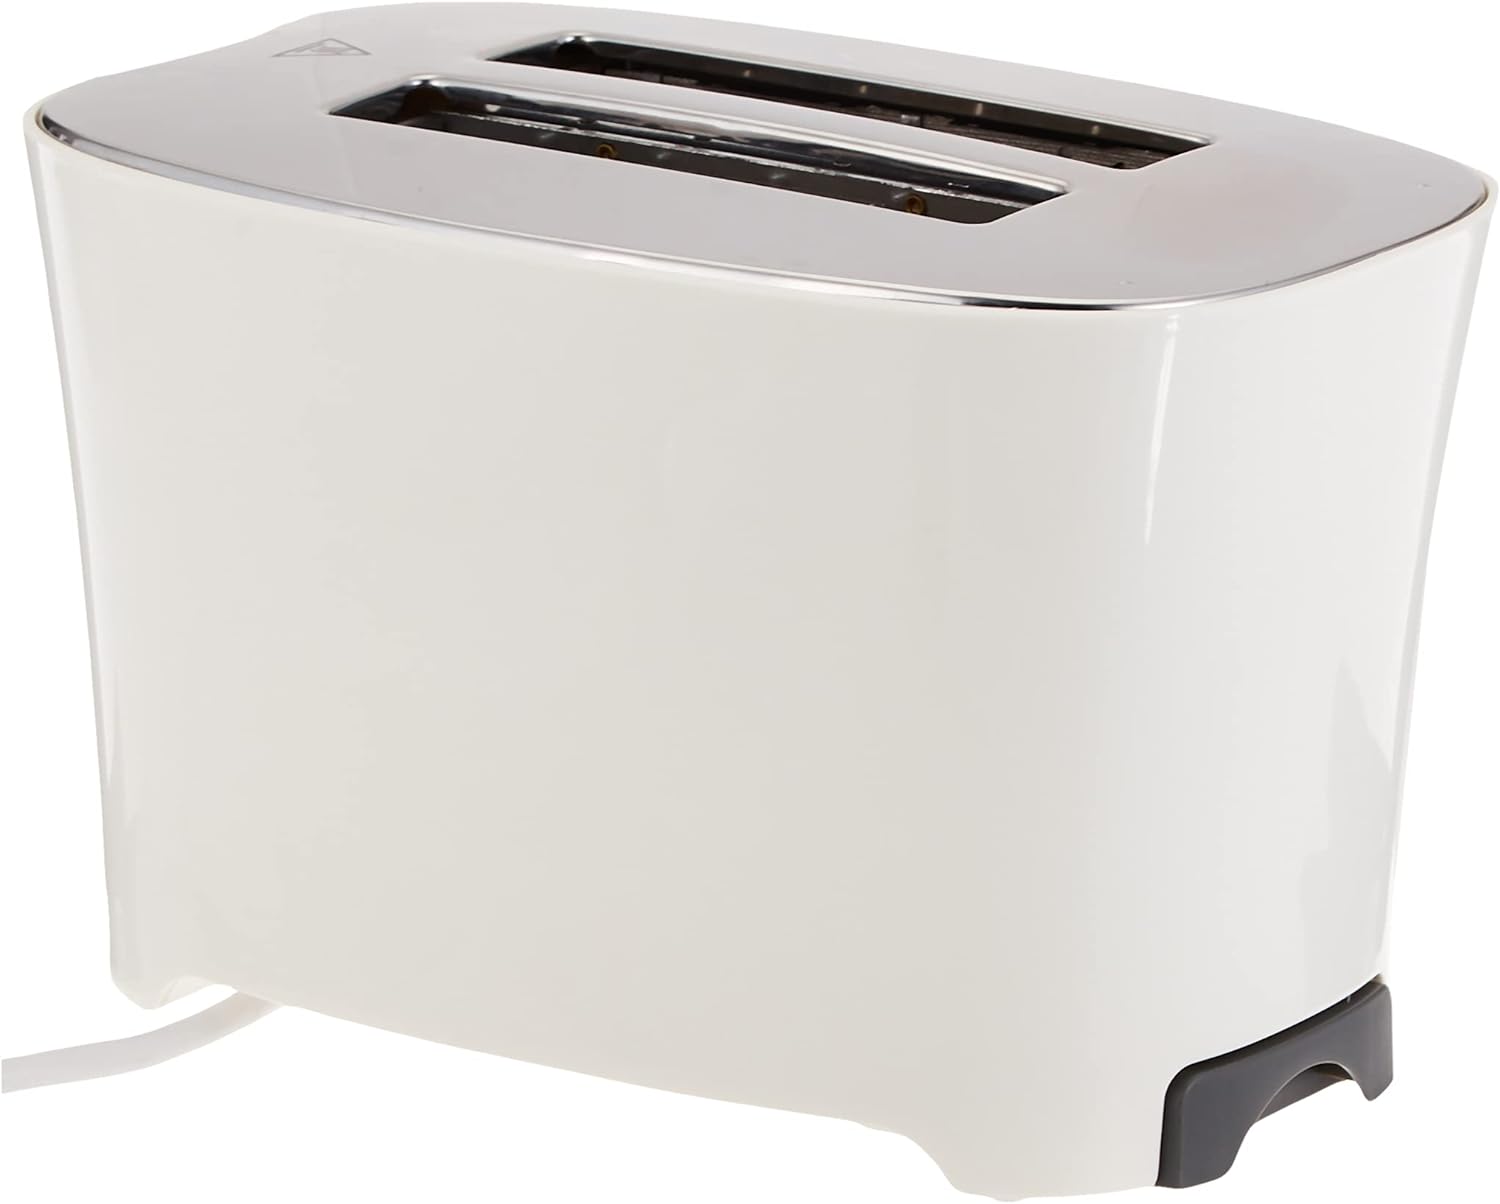 BLACK+DECKER 800W Toaster 2 Slice Browning Control with Frozen Reheat, Cancel Functions And Cool Touch White, For Perfect Toasts Everyday ET122-B5, 1 year warranty